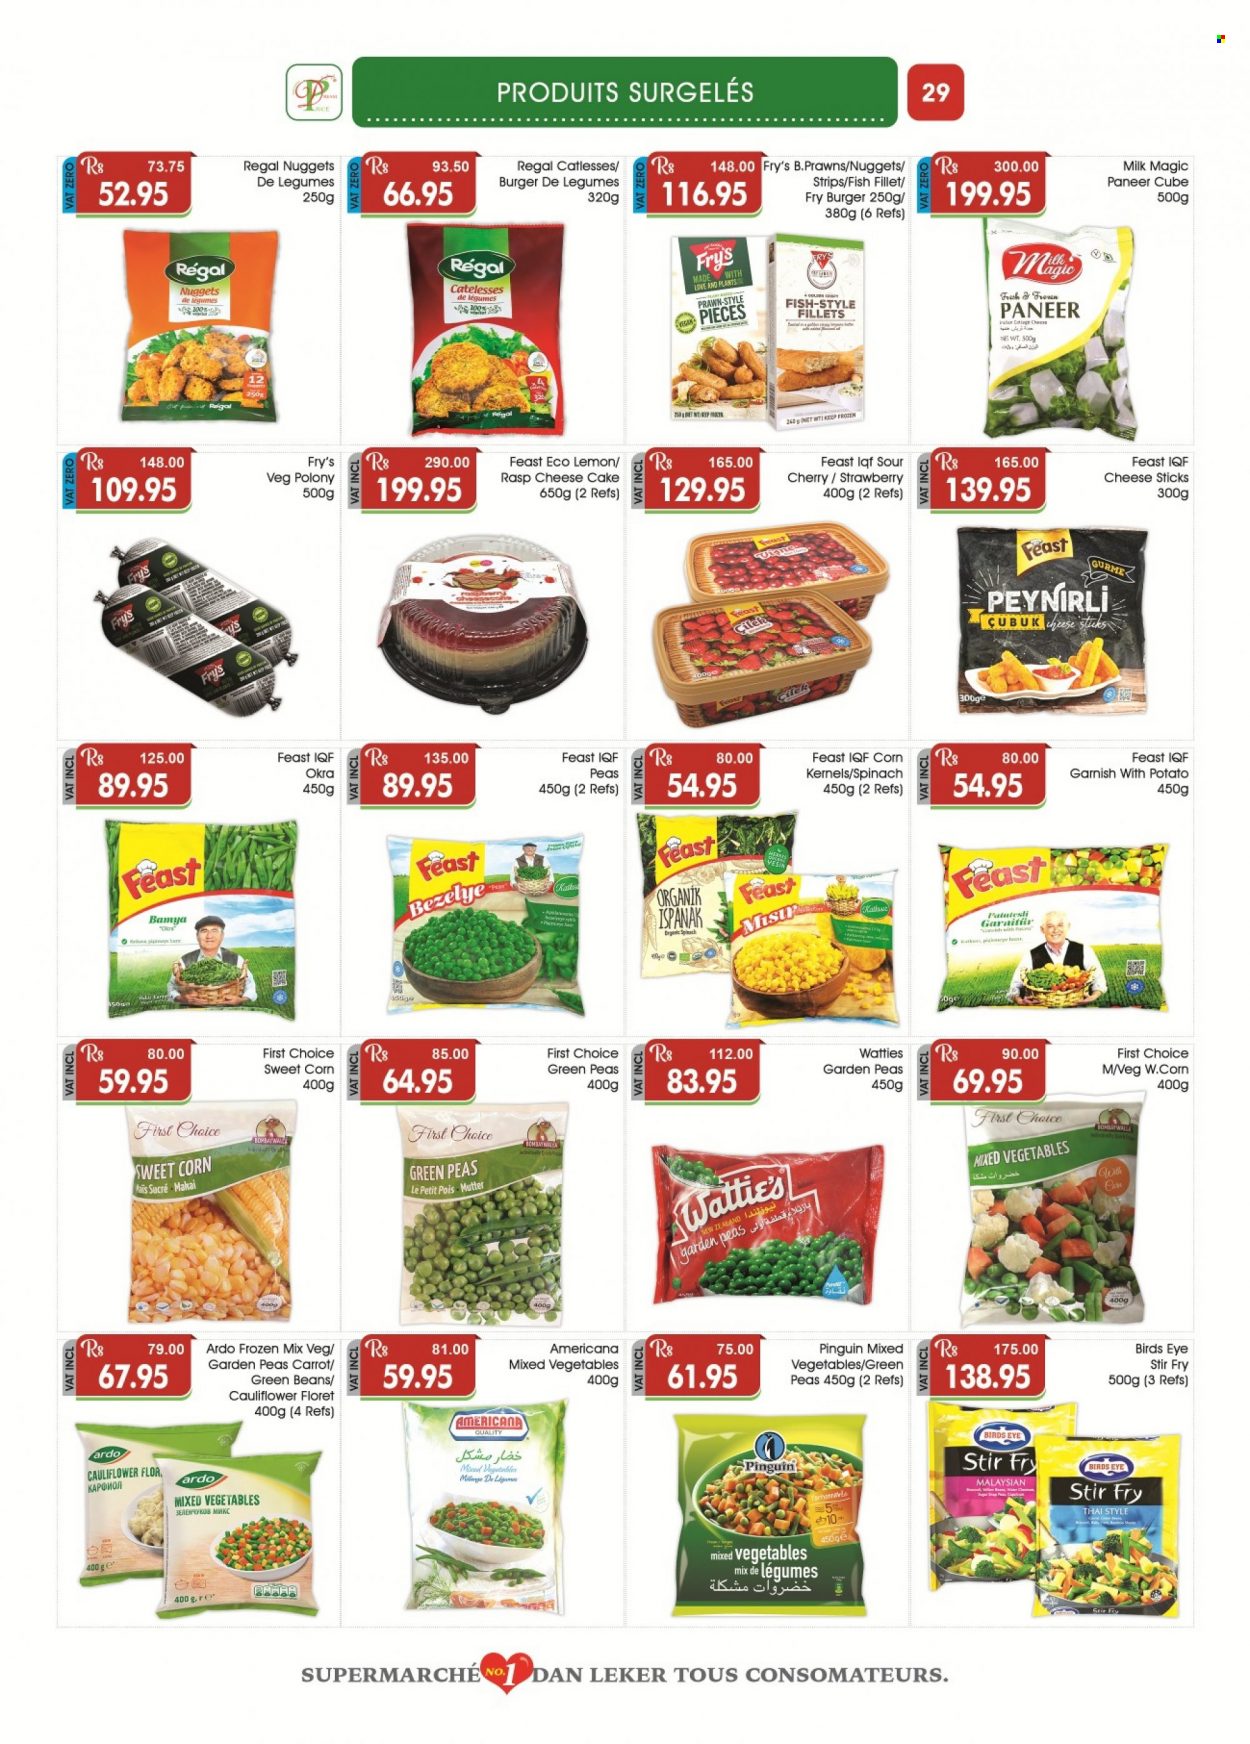 thumbnail - Dreamprice Catalogue - 21.01.2023 - 19.02.2023 - Sales products - cake, cheesecake, beans, cauliflower, corn, peas, okra, sweet corn, cherries, pears, fish fillets, prawns, fish, nuggets, hamburger, Bird's Eye, Wattie's, polony, paneer, cheese, milk, frozen vegetables, mixed vegetables, strips, cheese sticks, rice. Page 29.